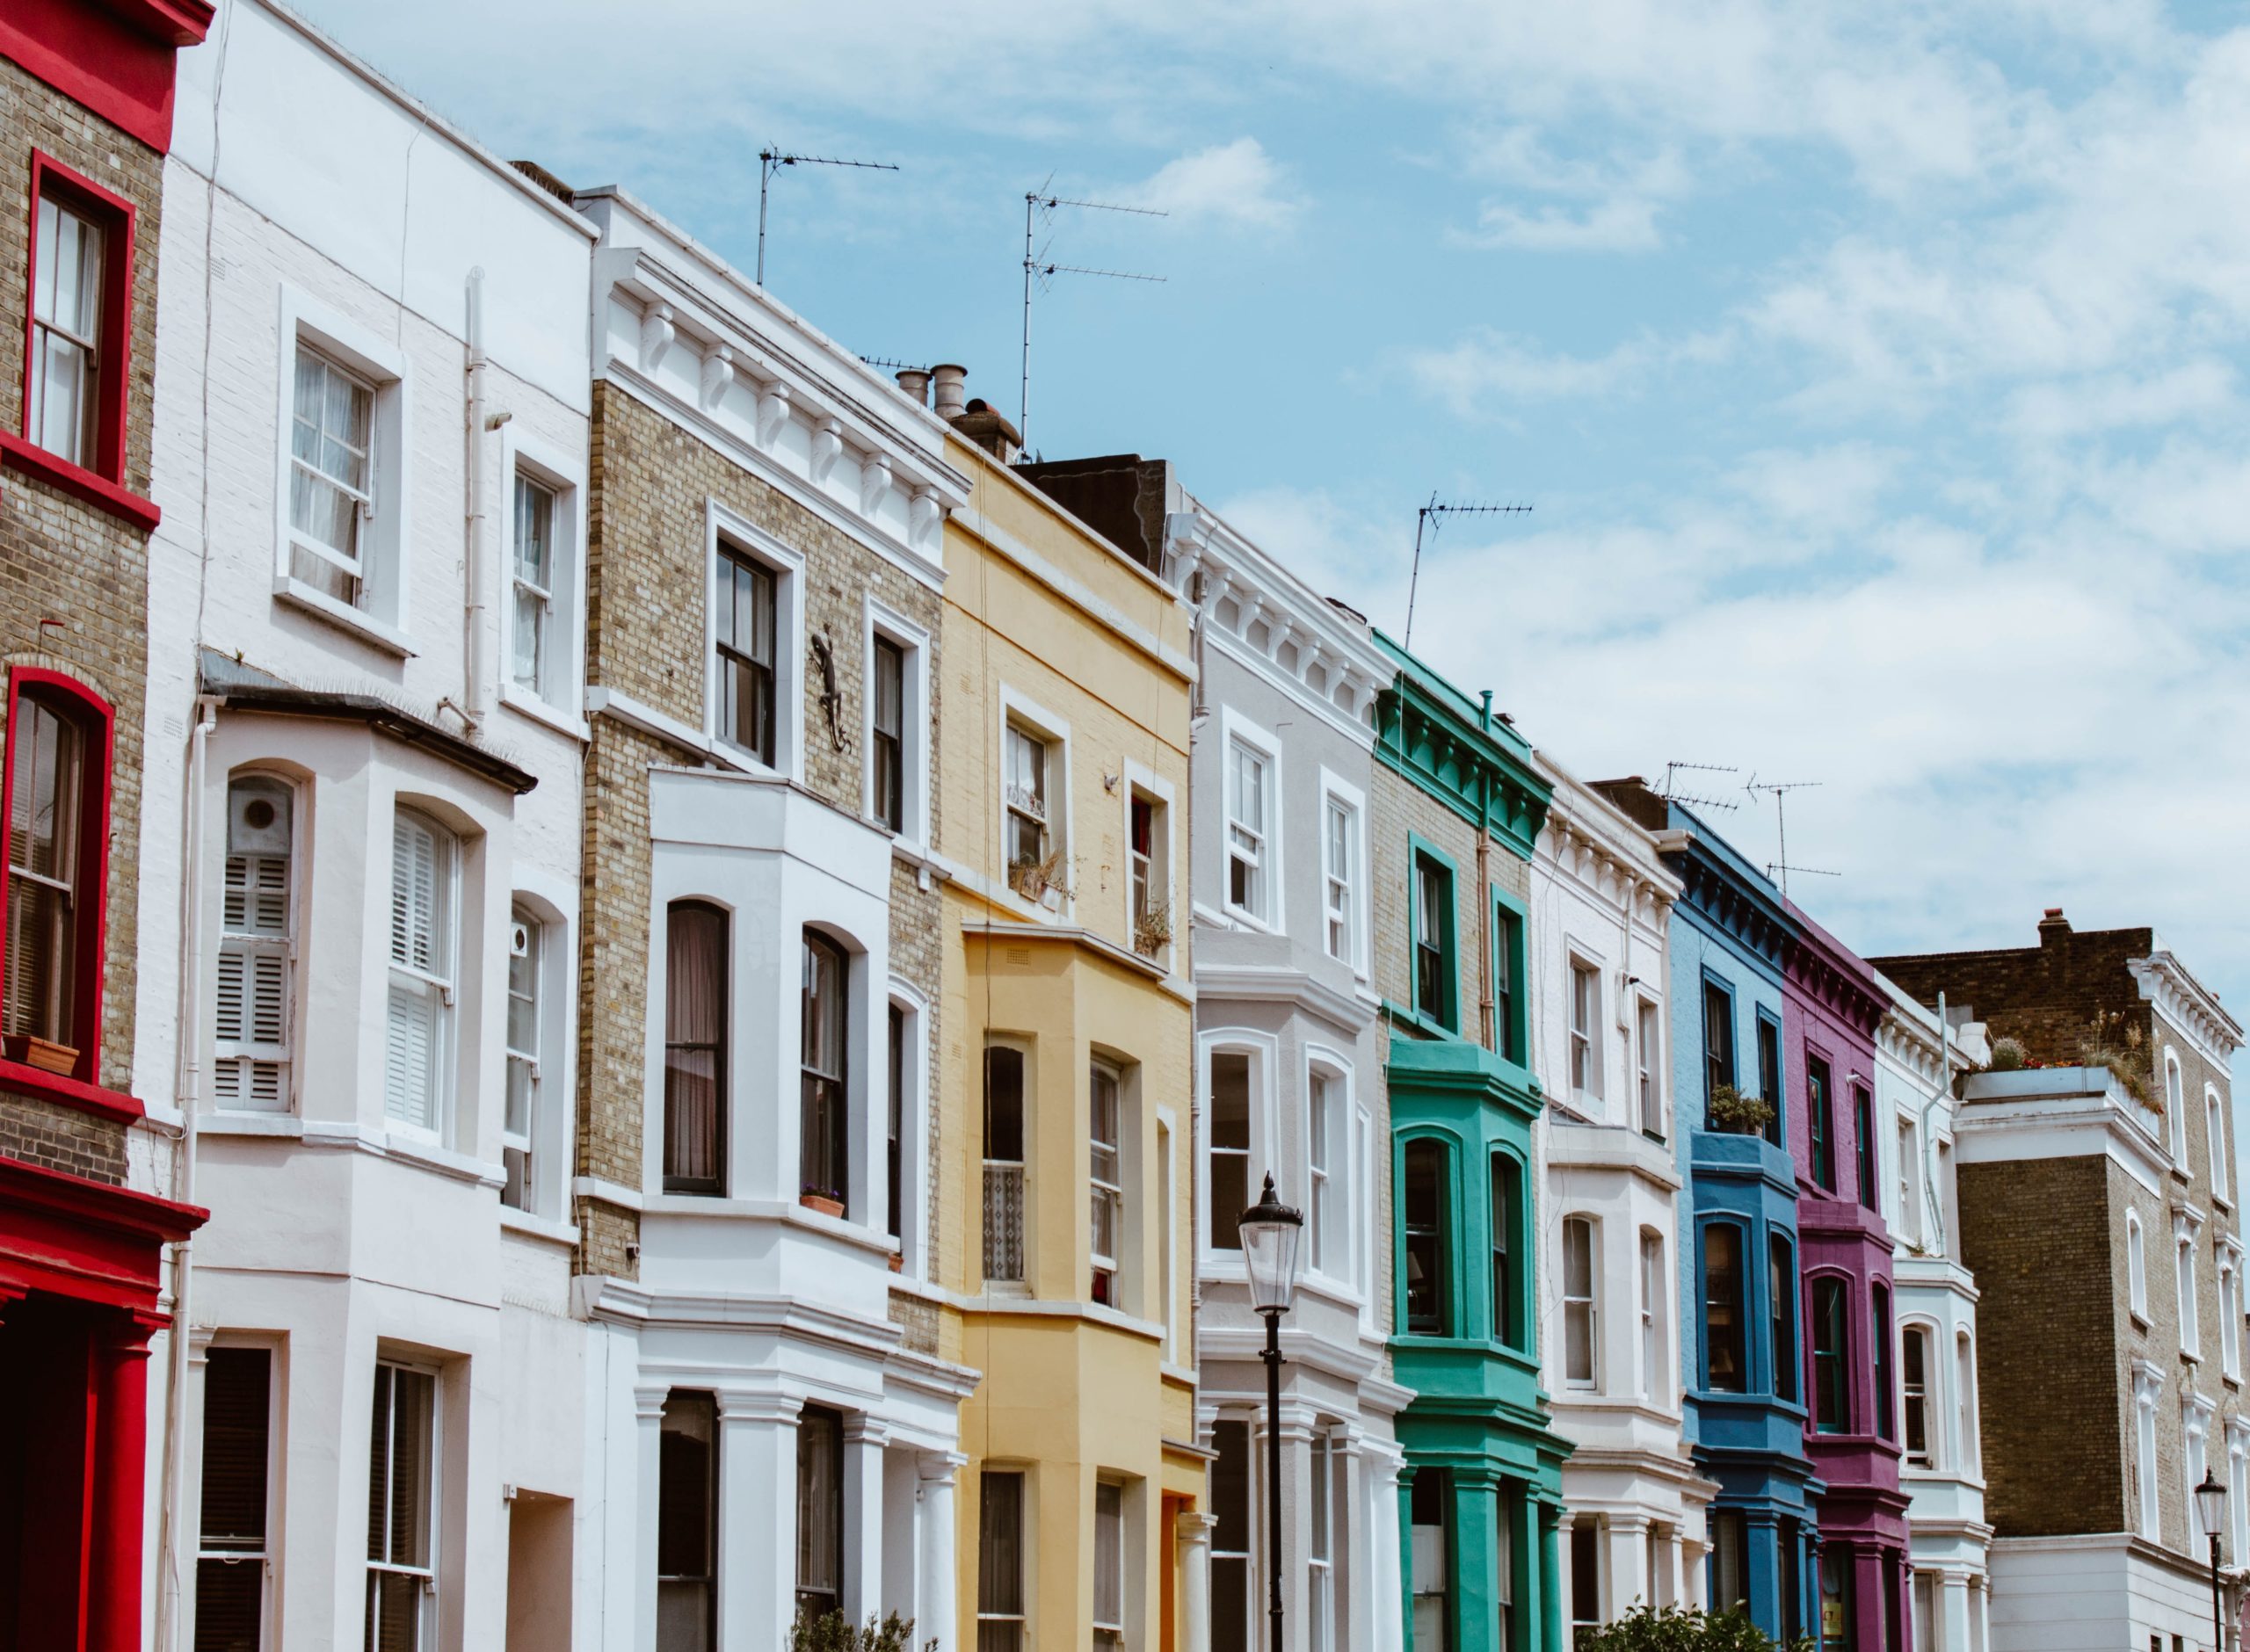 A row of houses in the UK, all painted different colours.